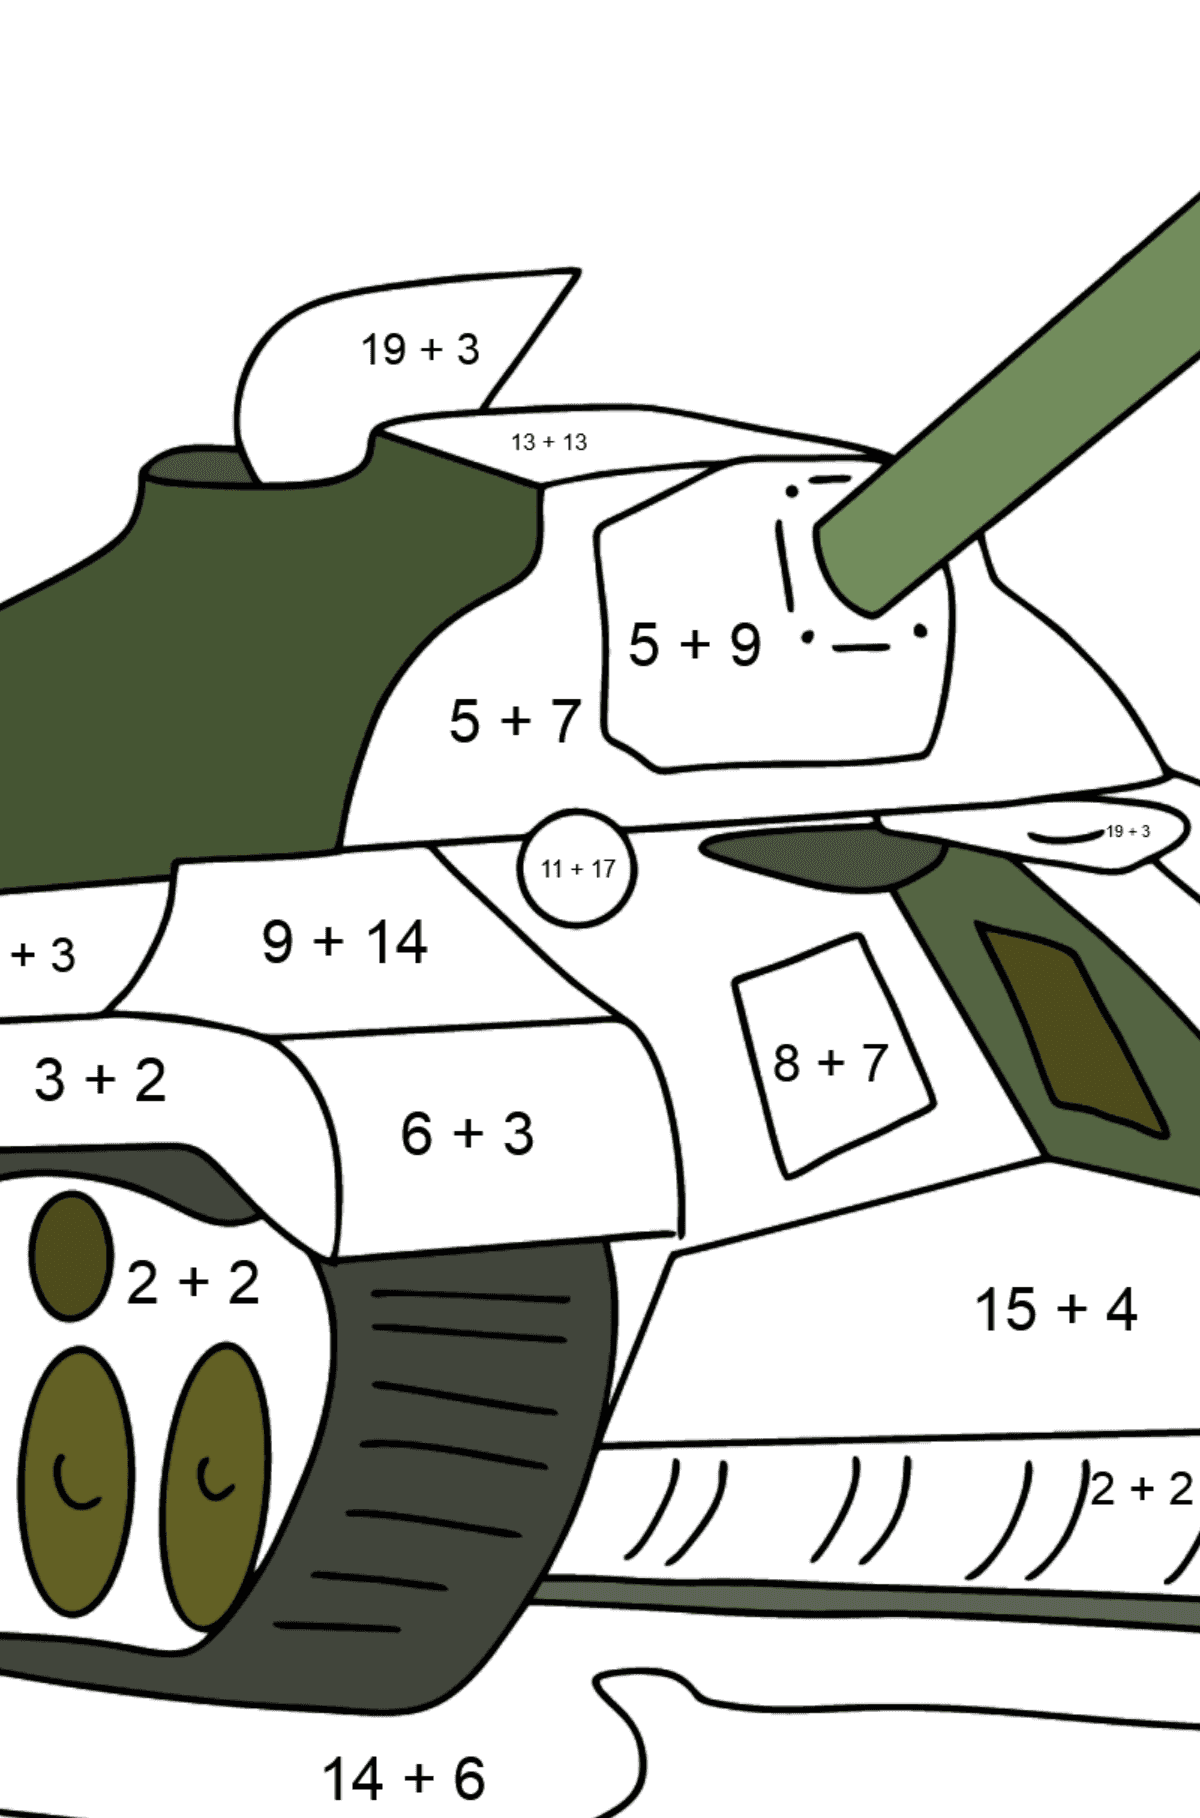 Tank IS 3 coloring page - Math Coloring - Addition for Kids